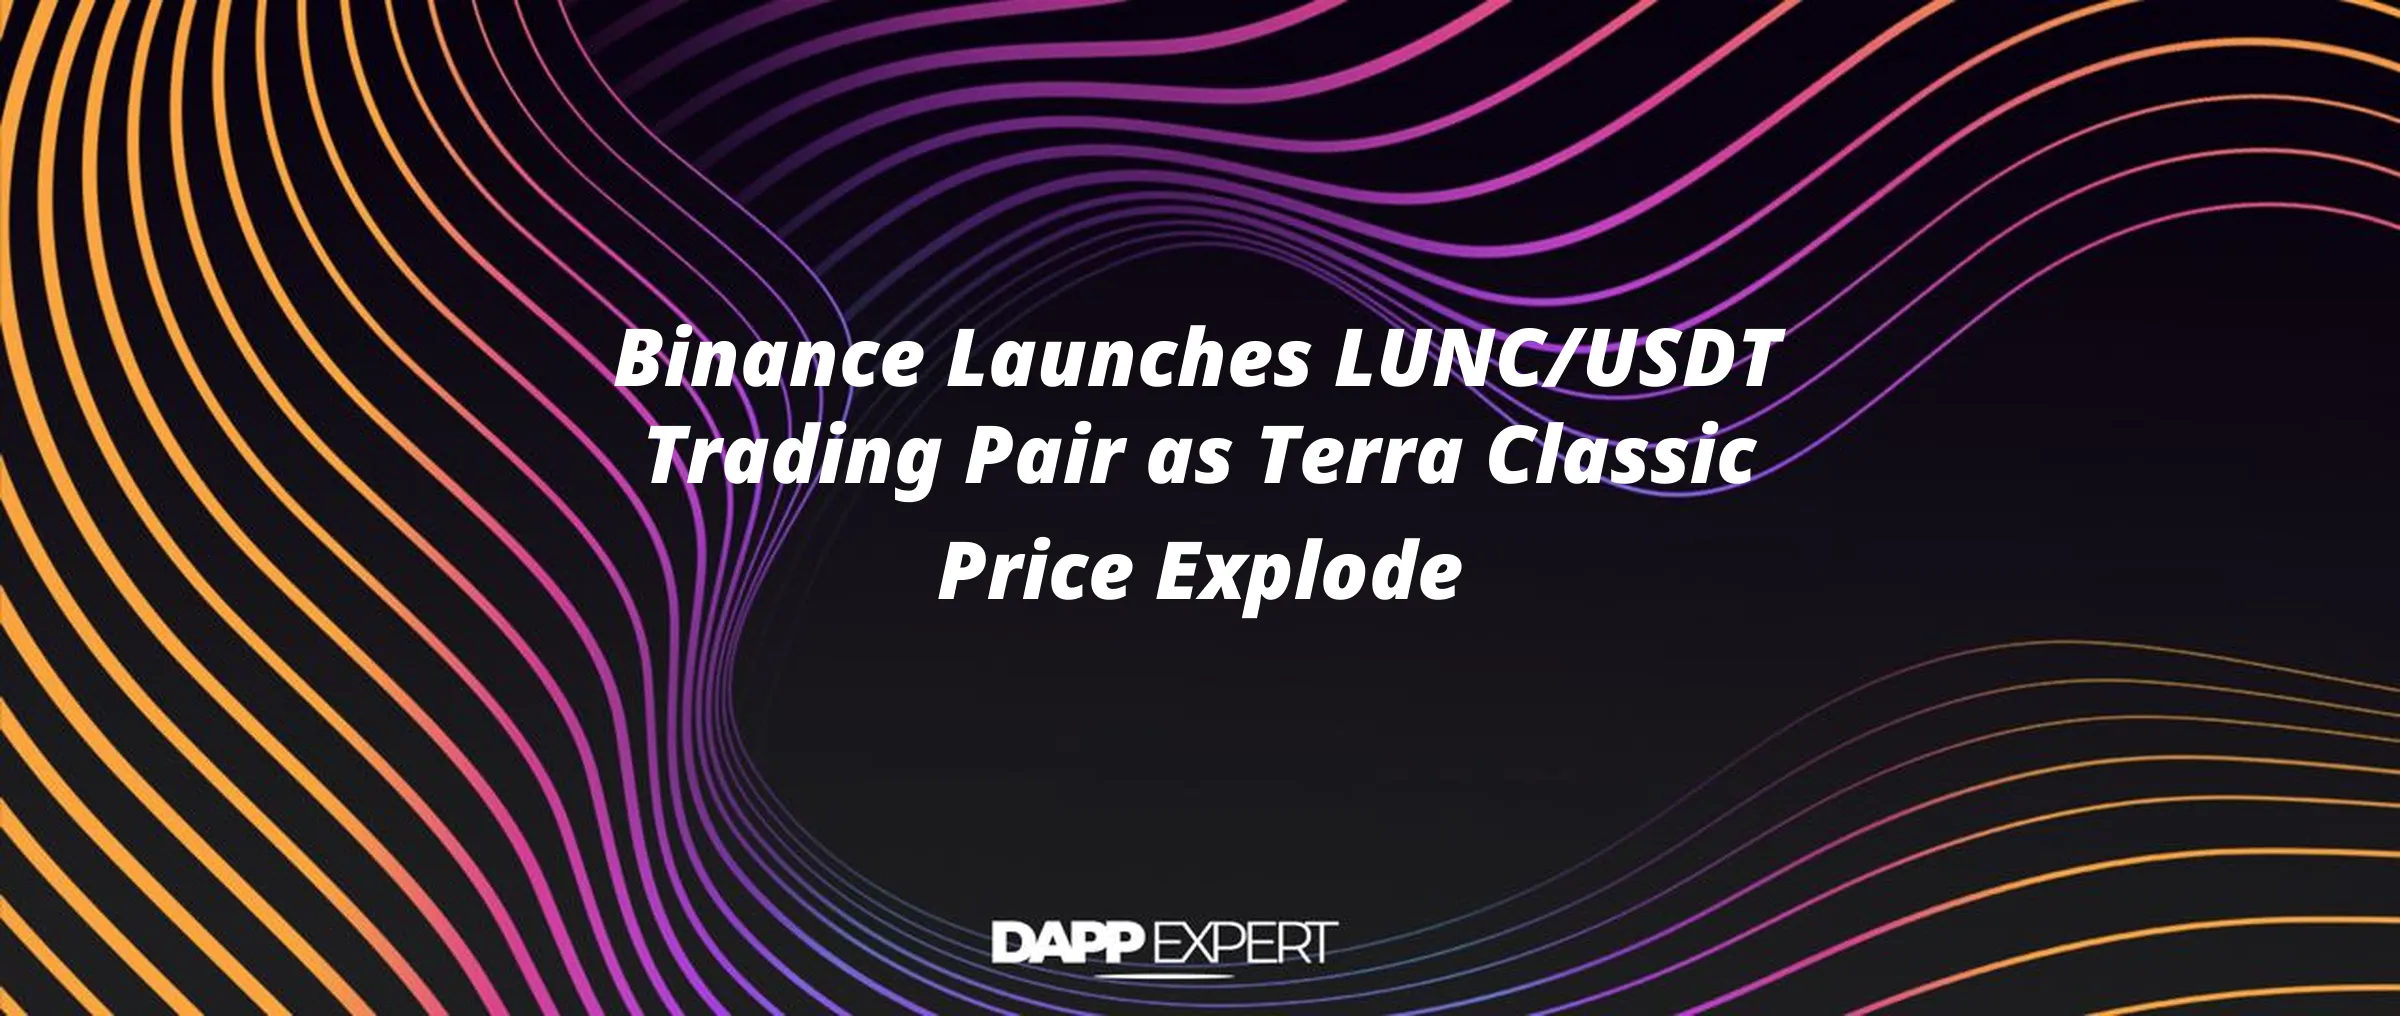 Binance Launches LUNC/USDT Trading Pair as Terra Classic Price Explode